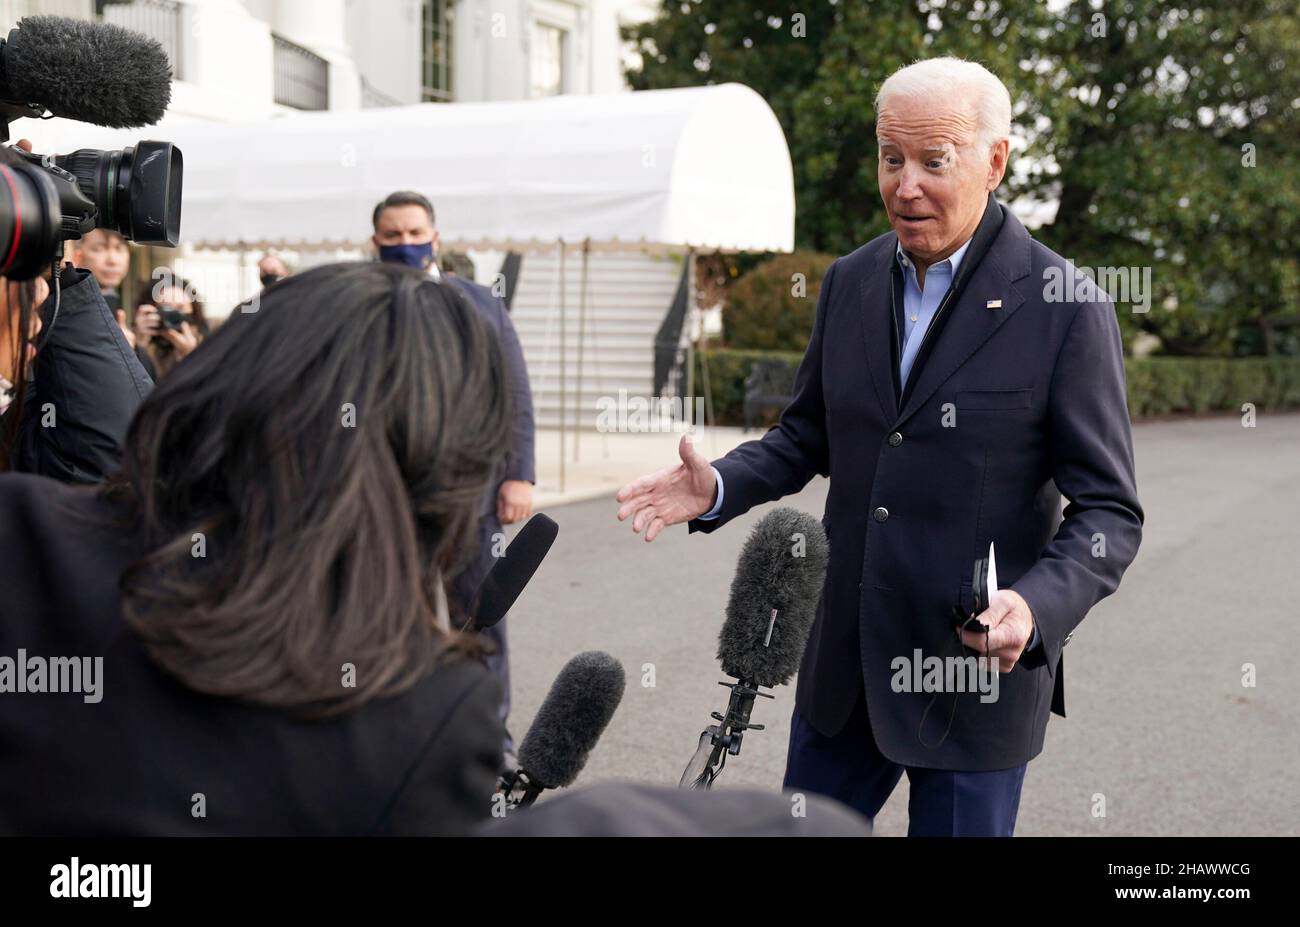 United States President Joe Biden speaks to media as he walks toward Marine One en route to Joint Base Andrews where he will depart to Fort Campbell, Kentucky and then on to Mayfield and Dawson Springs, Kentucky to survey storm damage following extreme weather events at the White House in Washington, DC on Wednesday, December 15, 2021. A series of storms hit states across the Midwest and the South leaving entire communities in Kentucky destroyed. Credit: Leigh Vogel/Pool via CNP Stock Photo